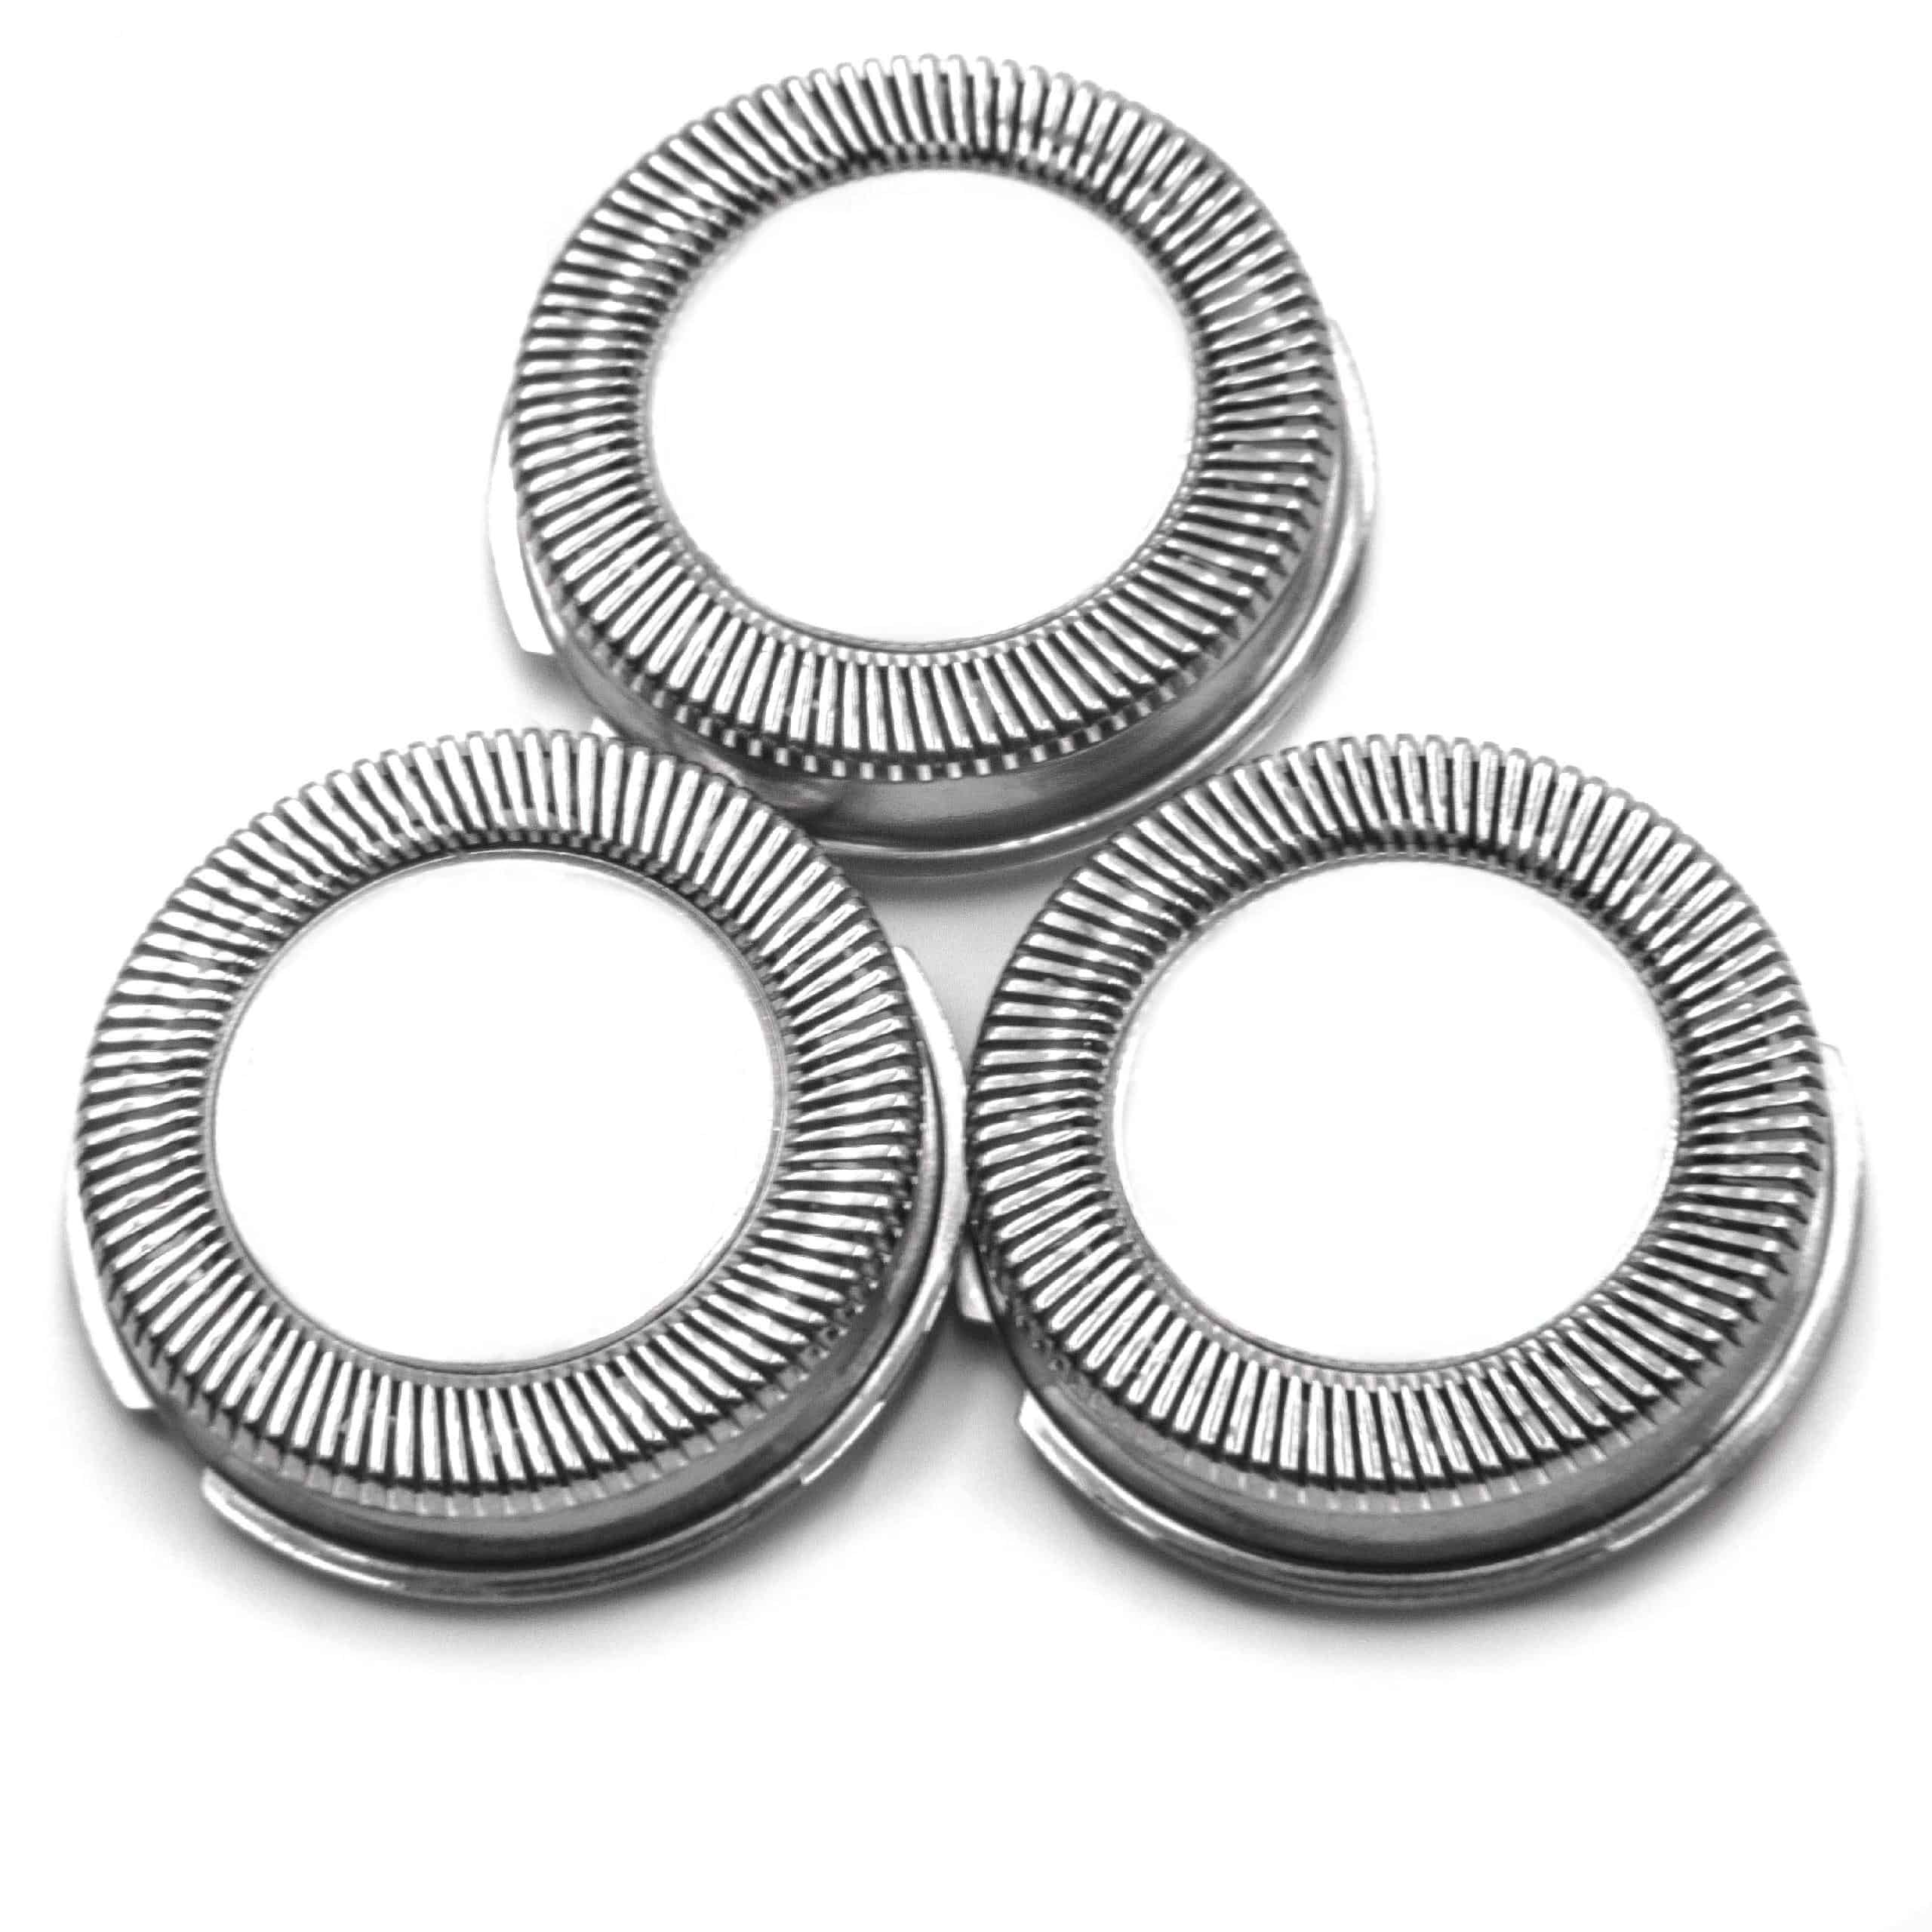 3x shaving head as Replacement for Philips HQ4 for Philips Shaver - Stainless Steel